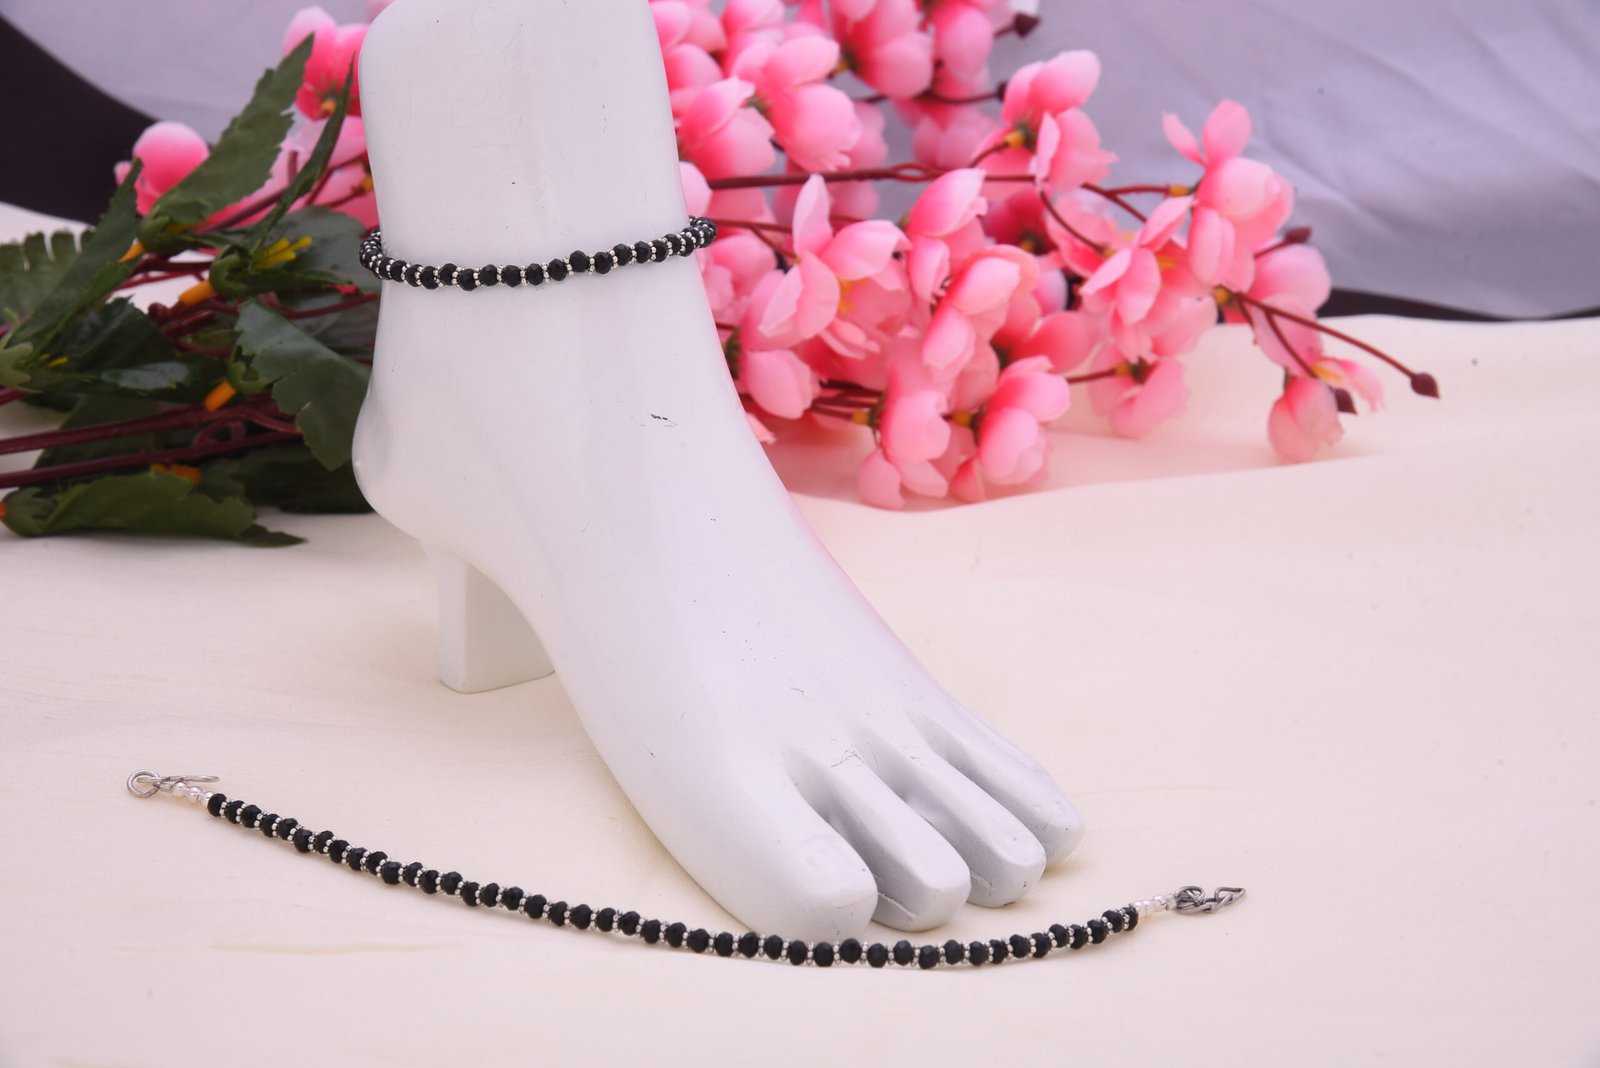 Black Beade Payal / Anklet strung with Silver Replica